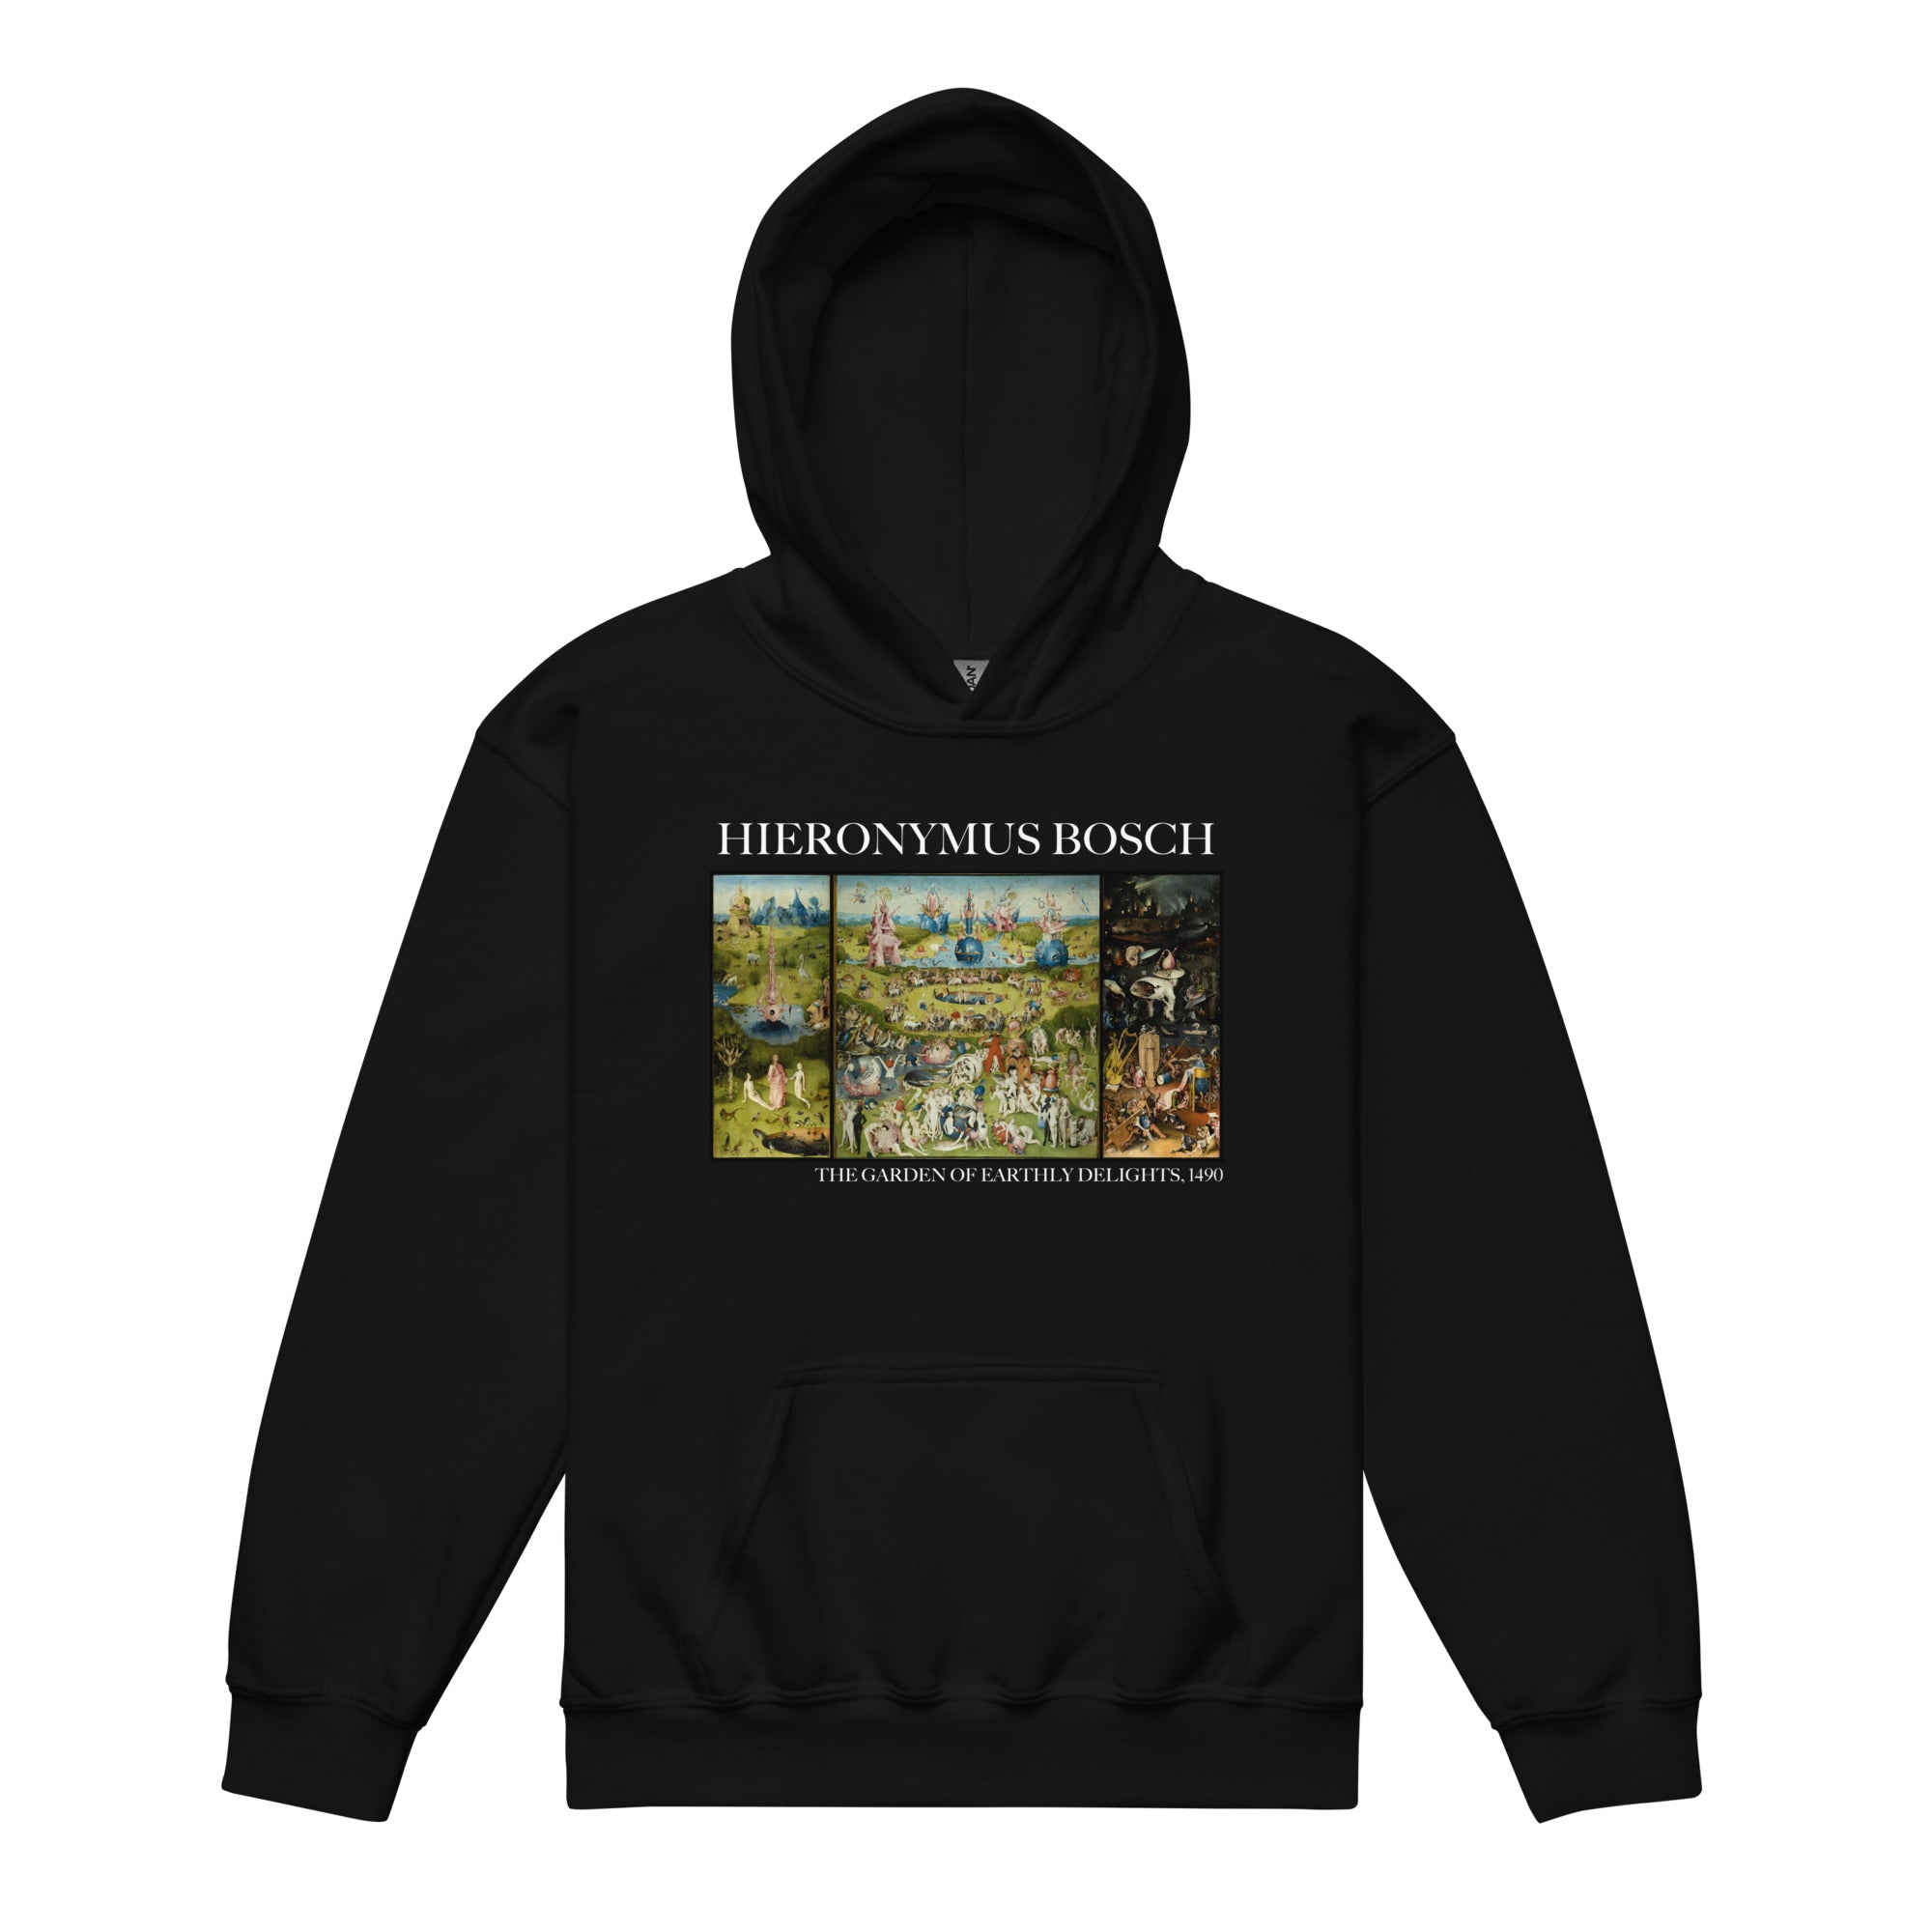 Hieronymus Bosch 'The Garden of Earthly Delights' Famous Painting Hoodie | Premium Youth Art Hoodie